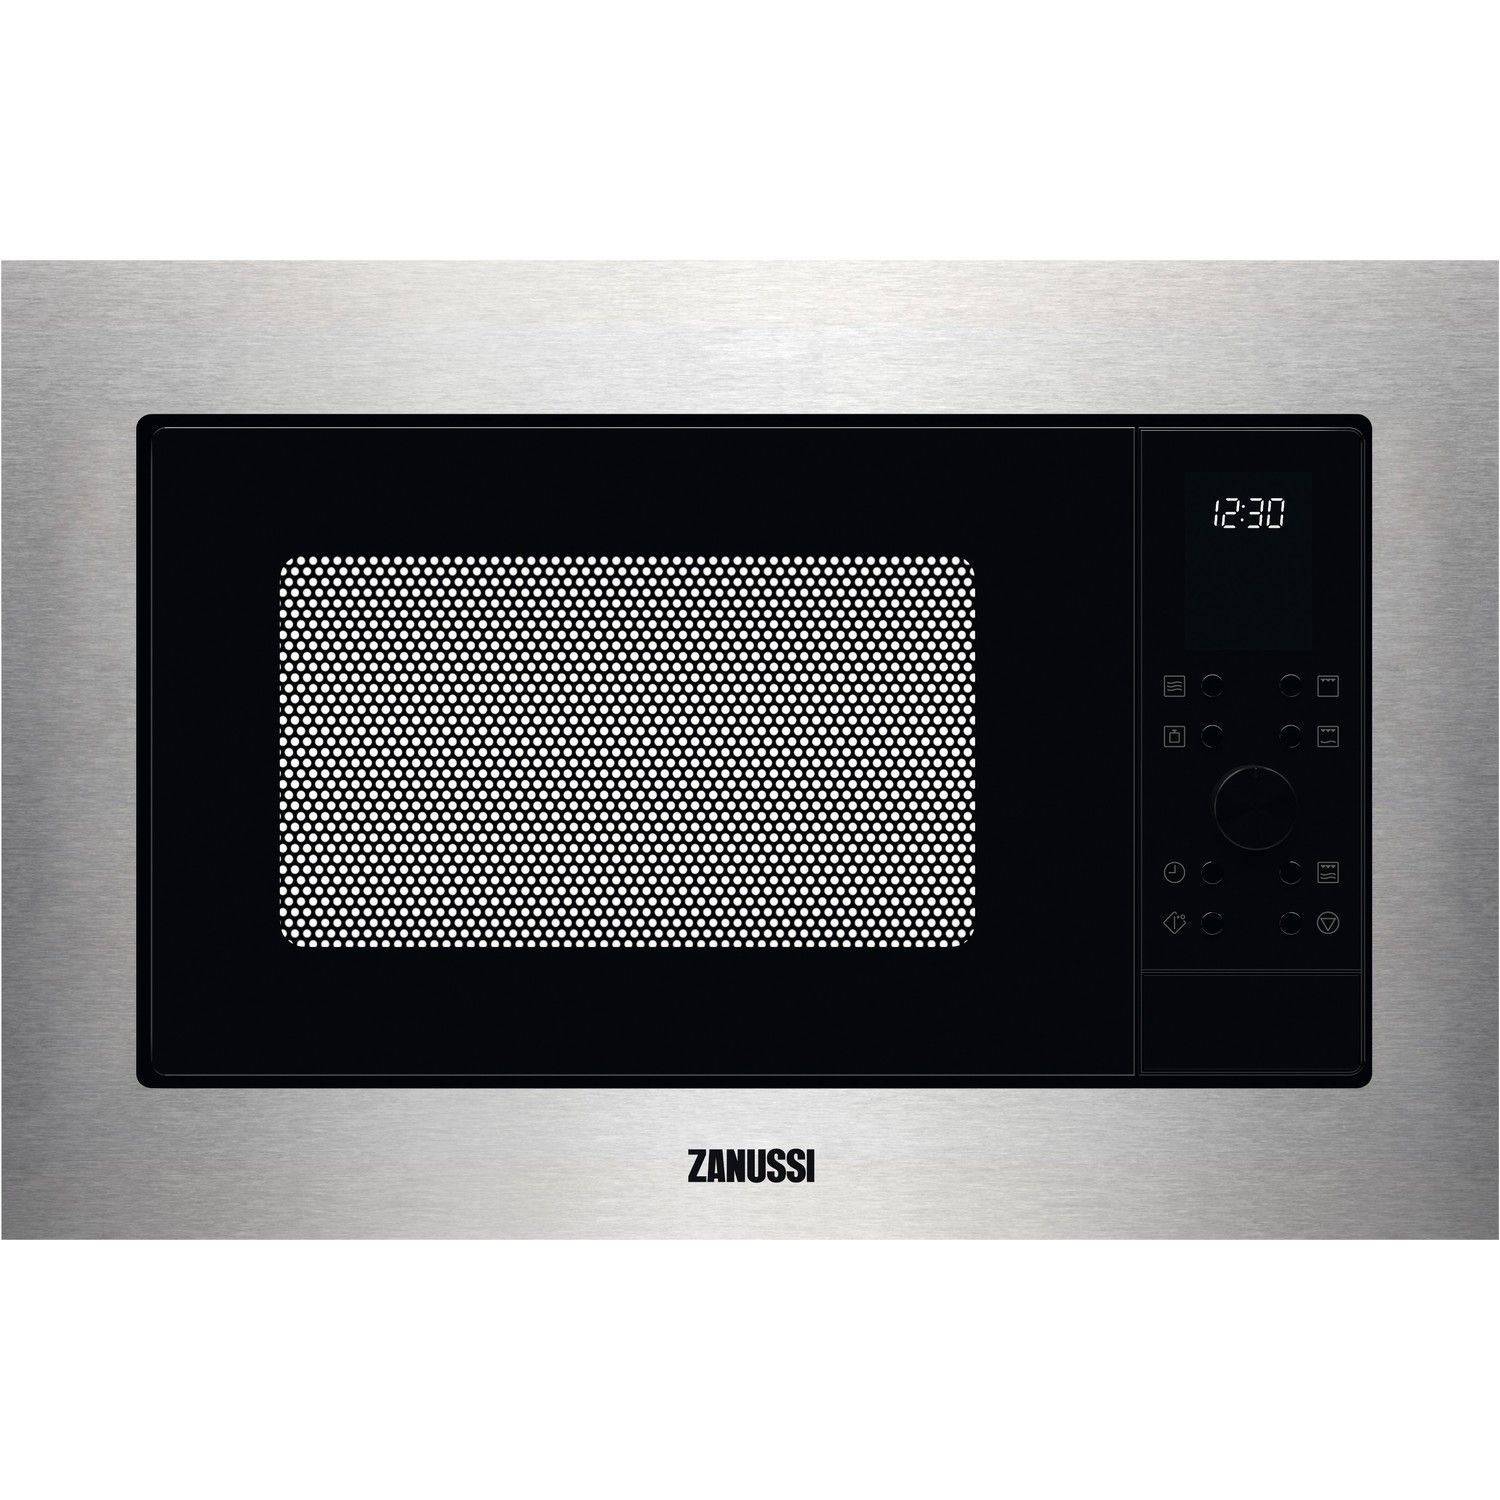 Refurbished Zanussi Series 20 ZMSN7DX Built In 25L with Grill 900W Microwave Stainless Steel